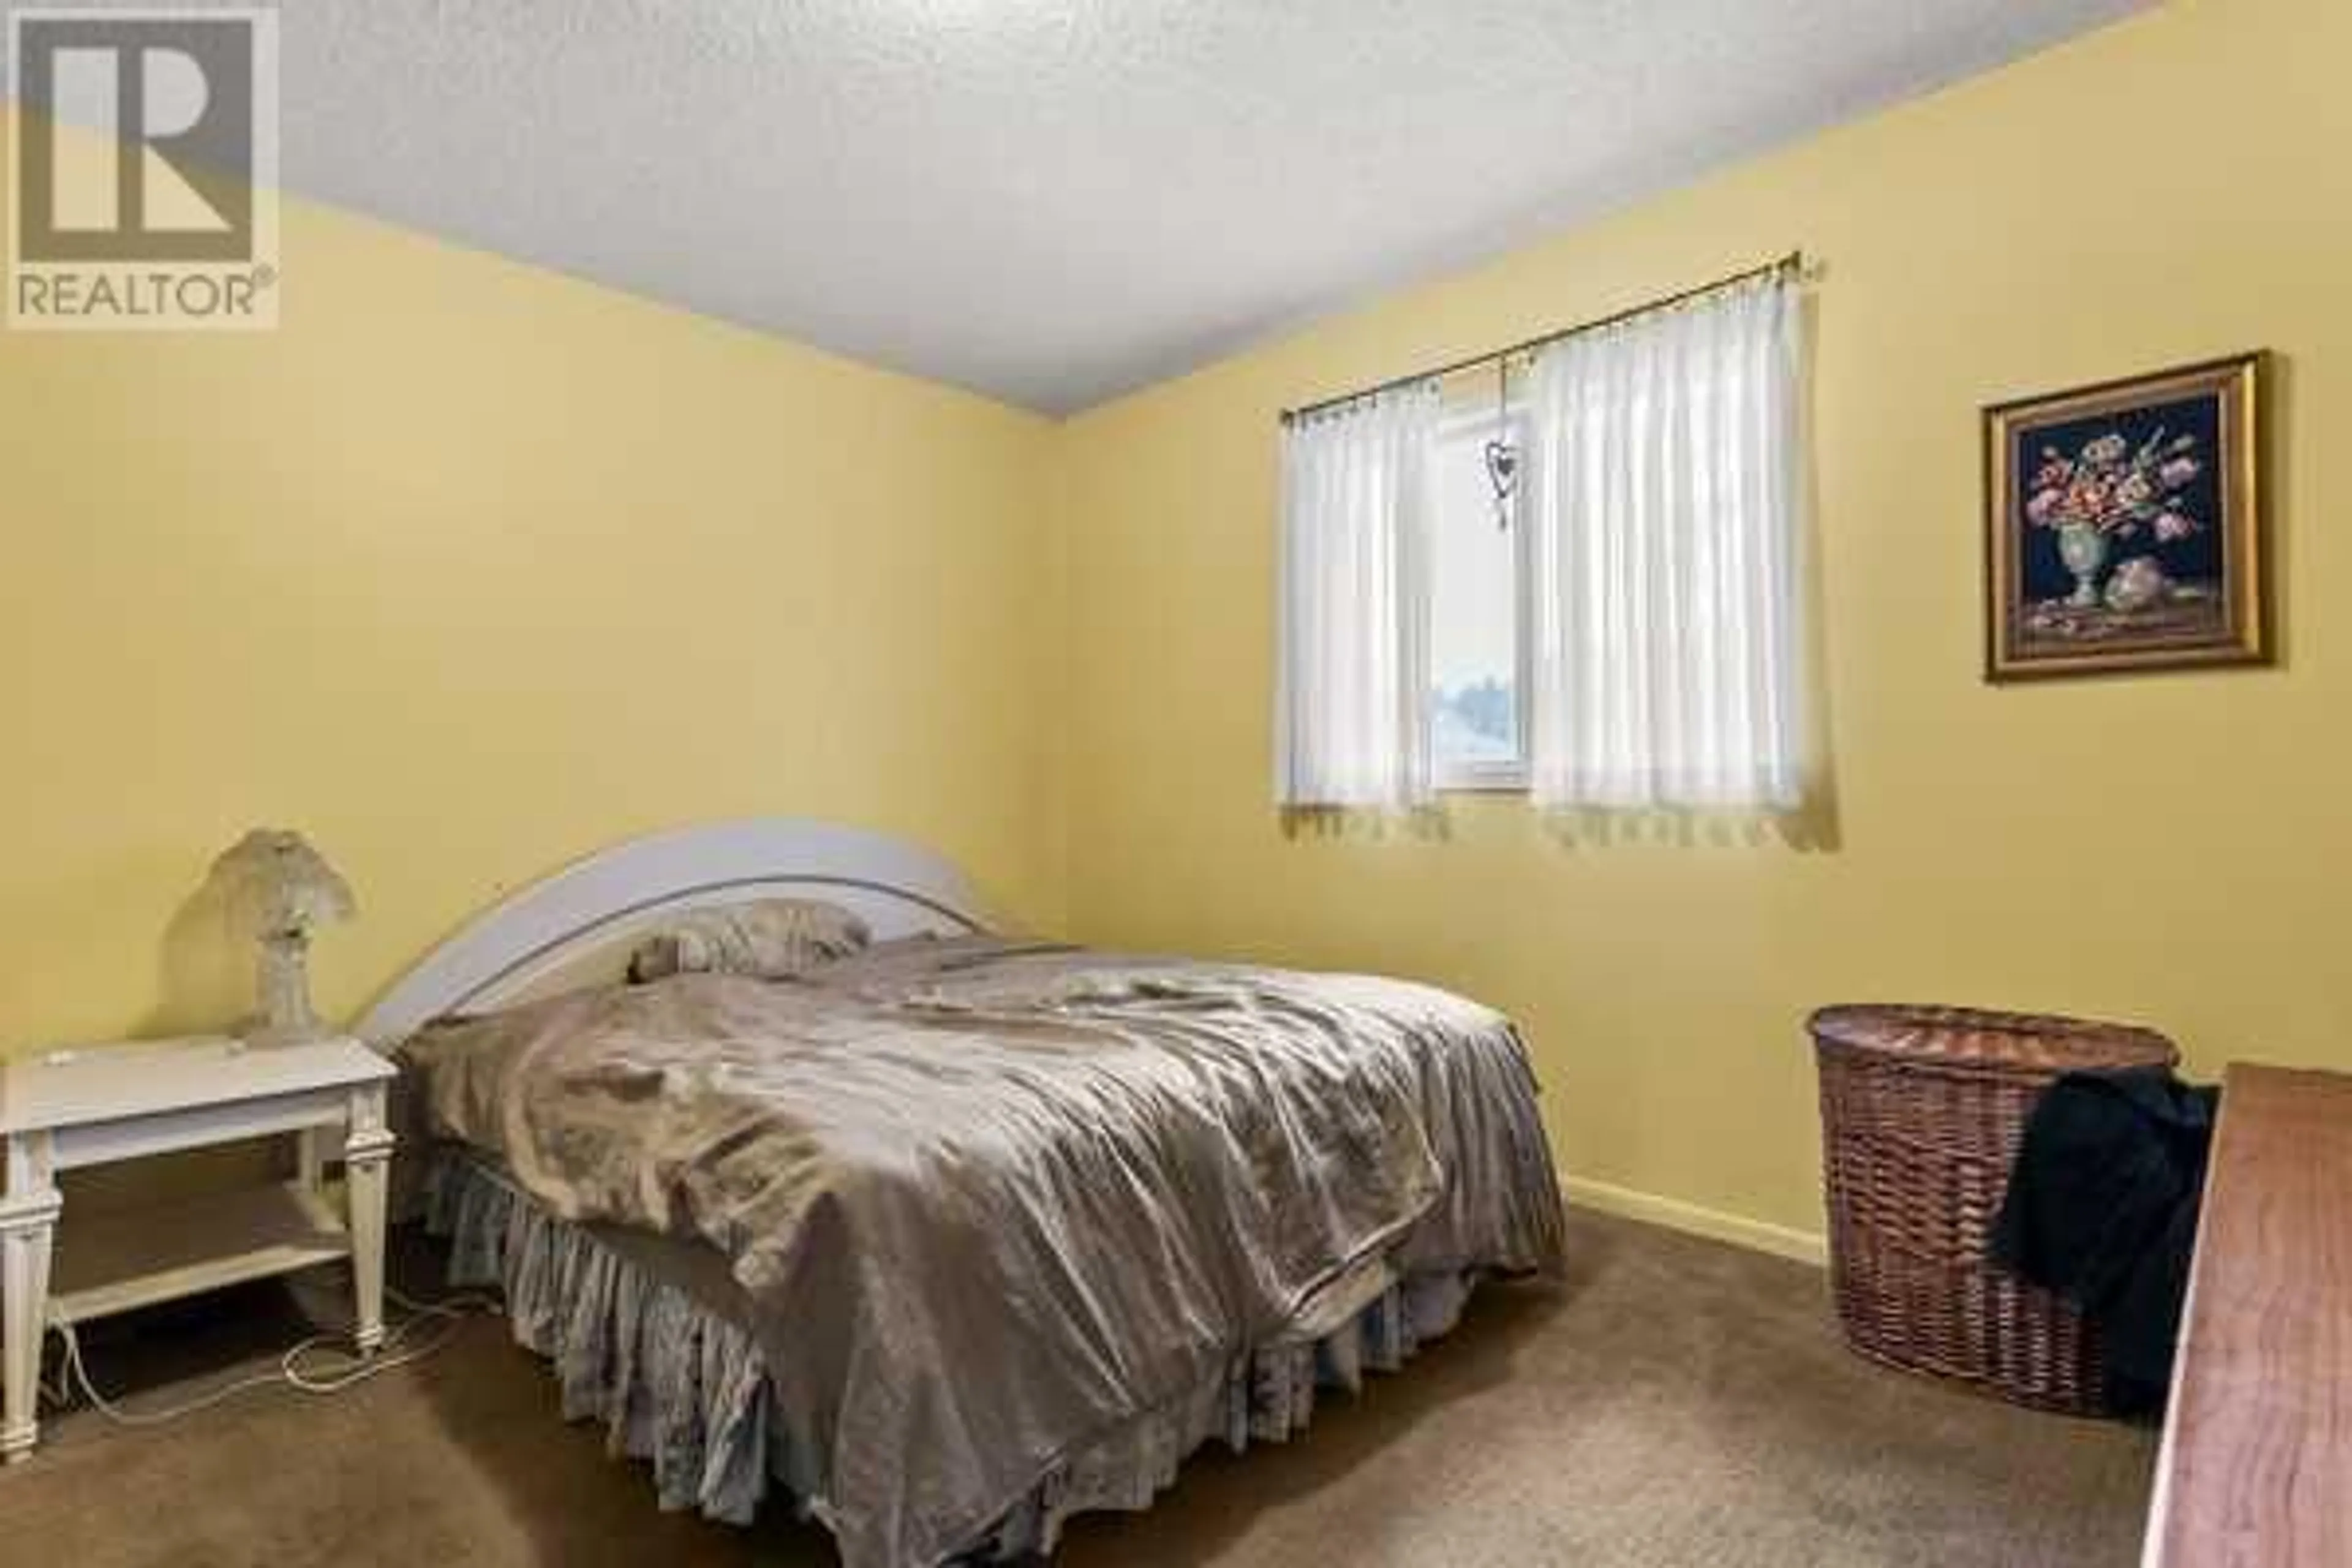 A pic of a room for 8020 34 Avenue NW, Calgary Alberta T3B1P7